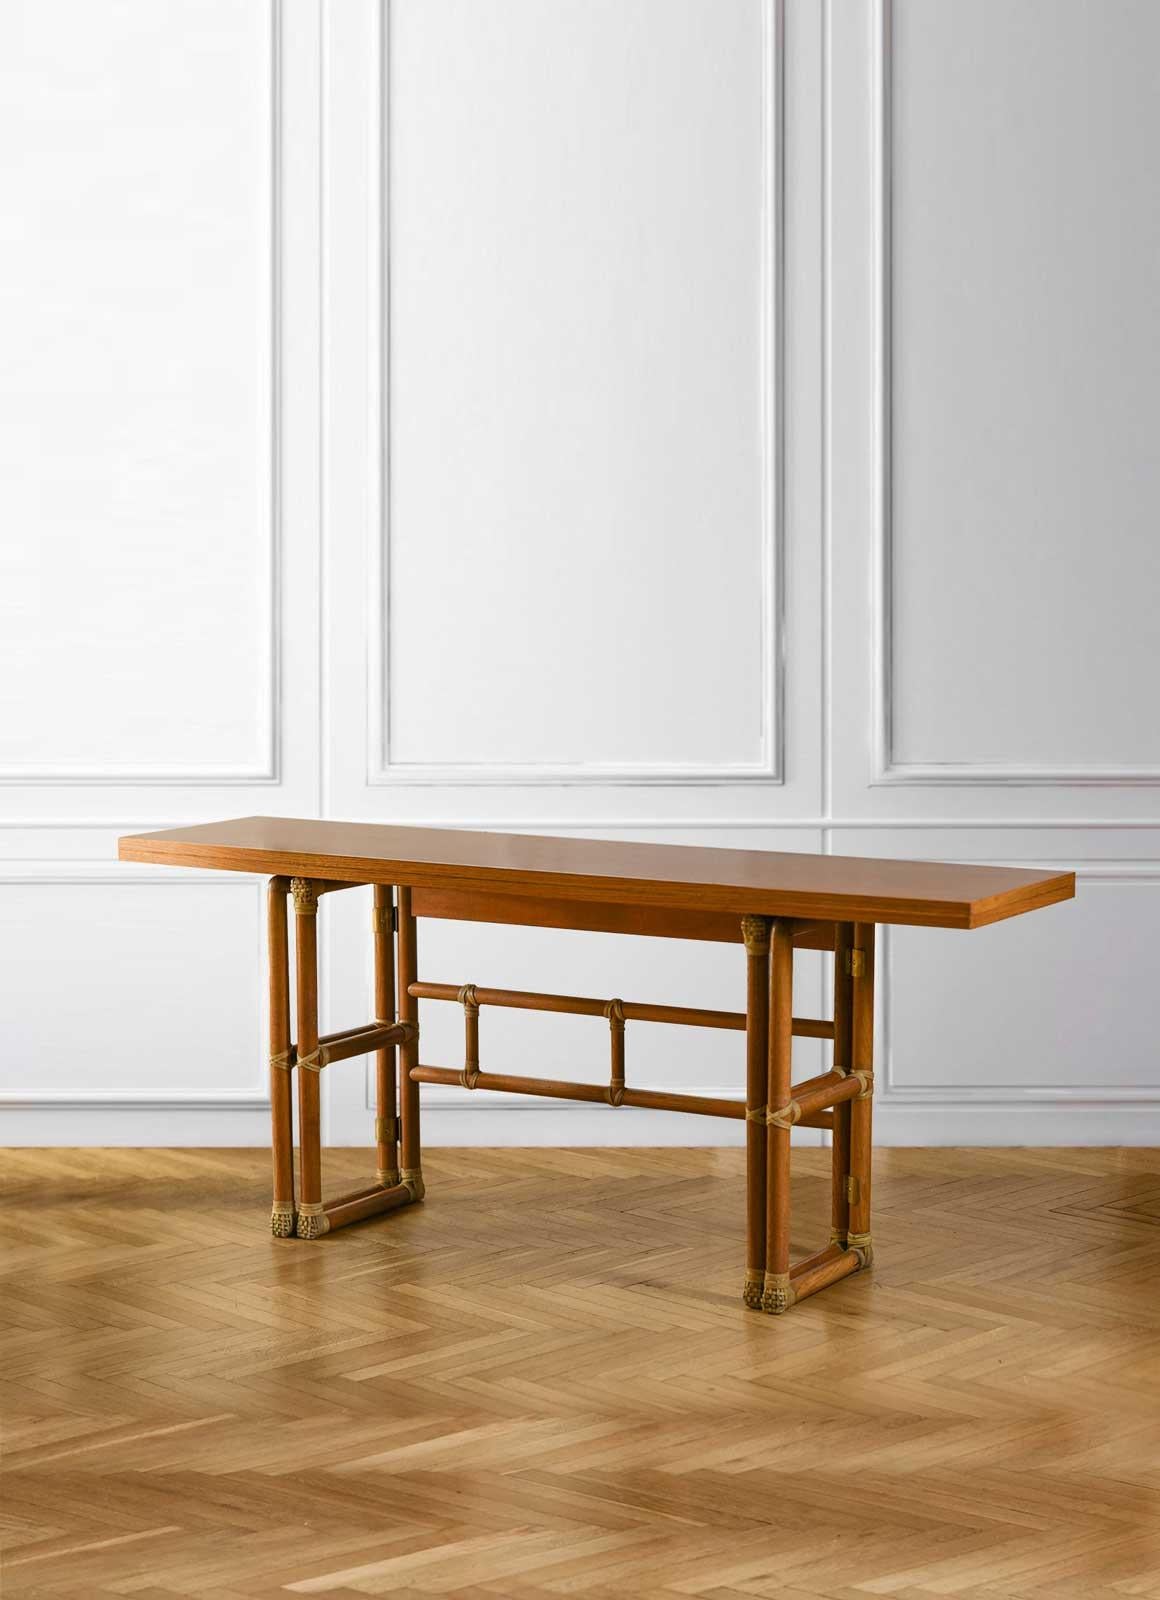 Lyda-Levi-McGuire console with flip-top top 1970. 
Made of rattan, wood and leather bindings.
Label applied under the table top.
Product details
Dimensions (closed): 183 W x 75 H x 45 D
Dimensions (opened): 183 W x 75 H x 90 D
Production: Lyda